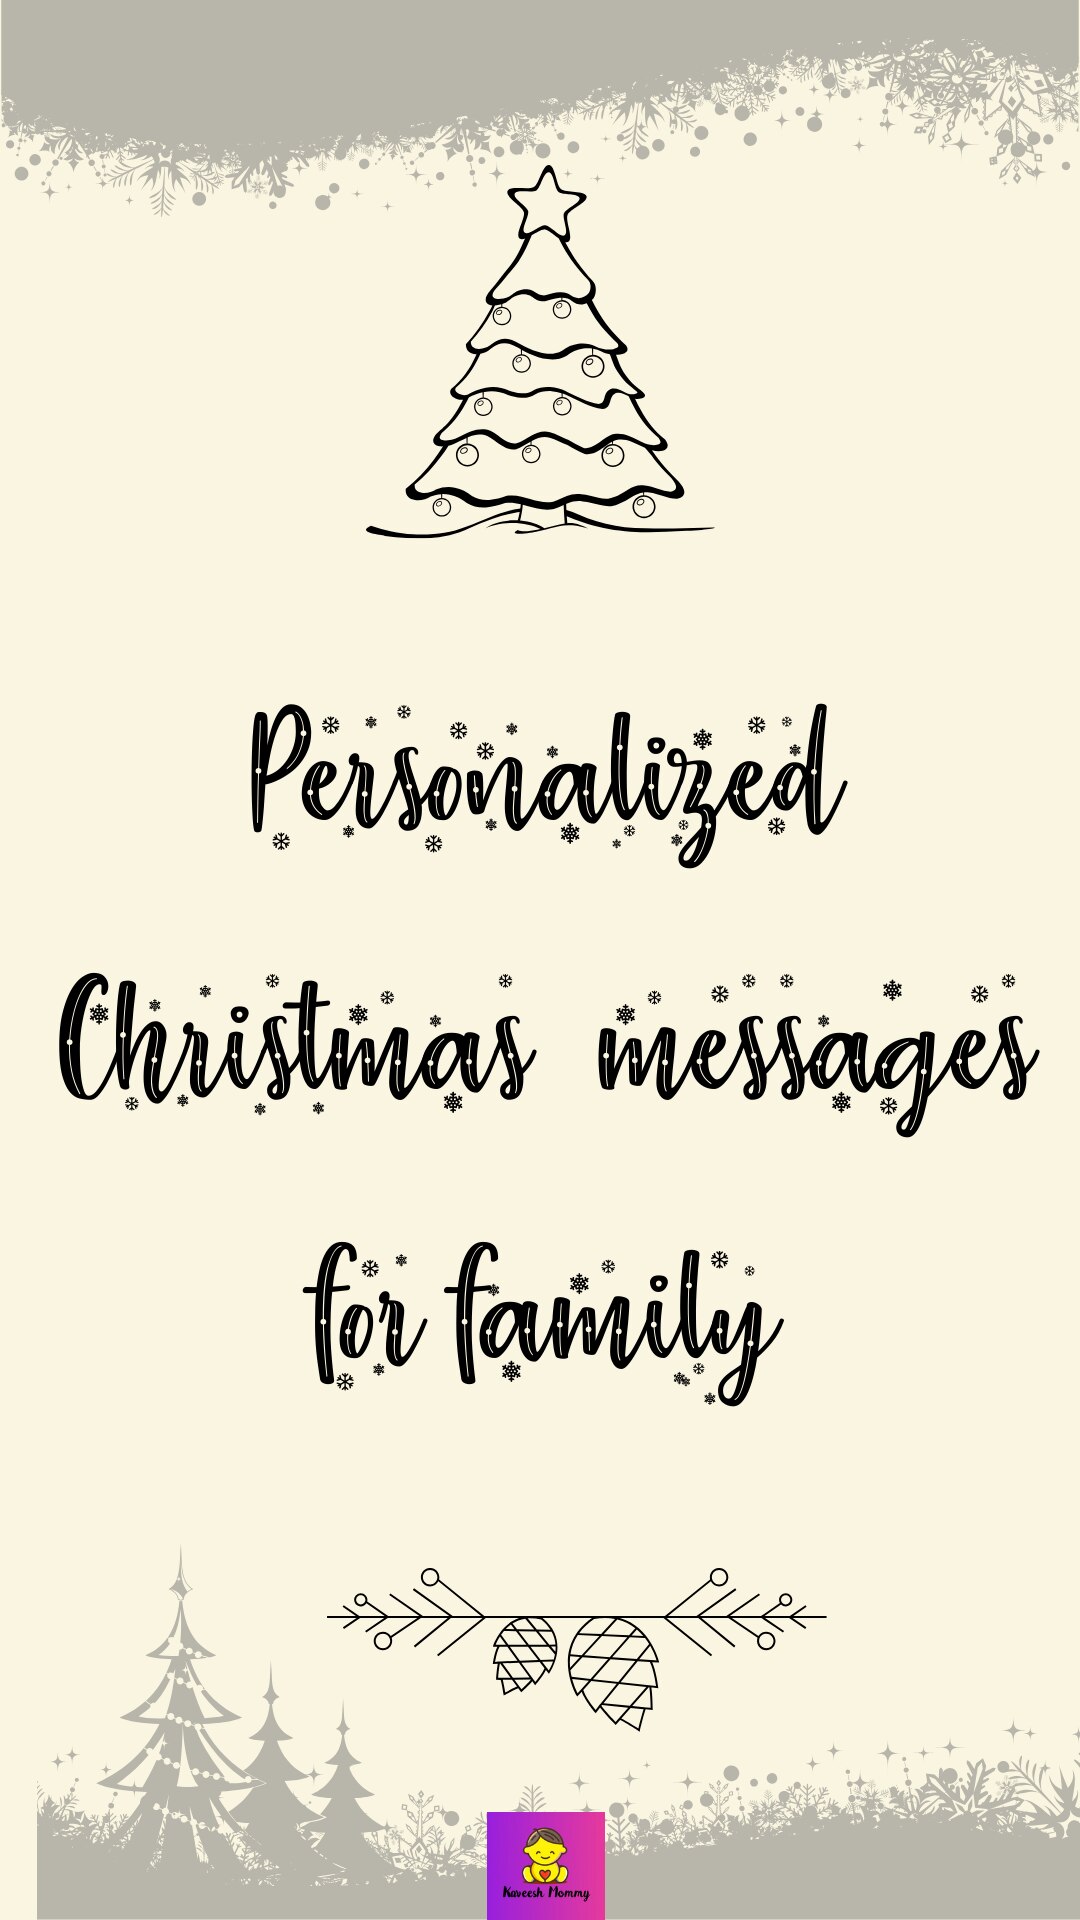 List of Personalized Christmas messages for family